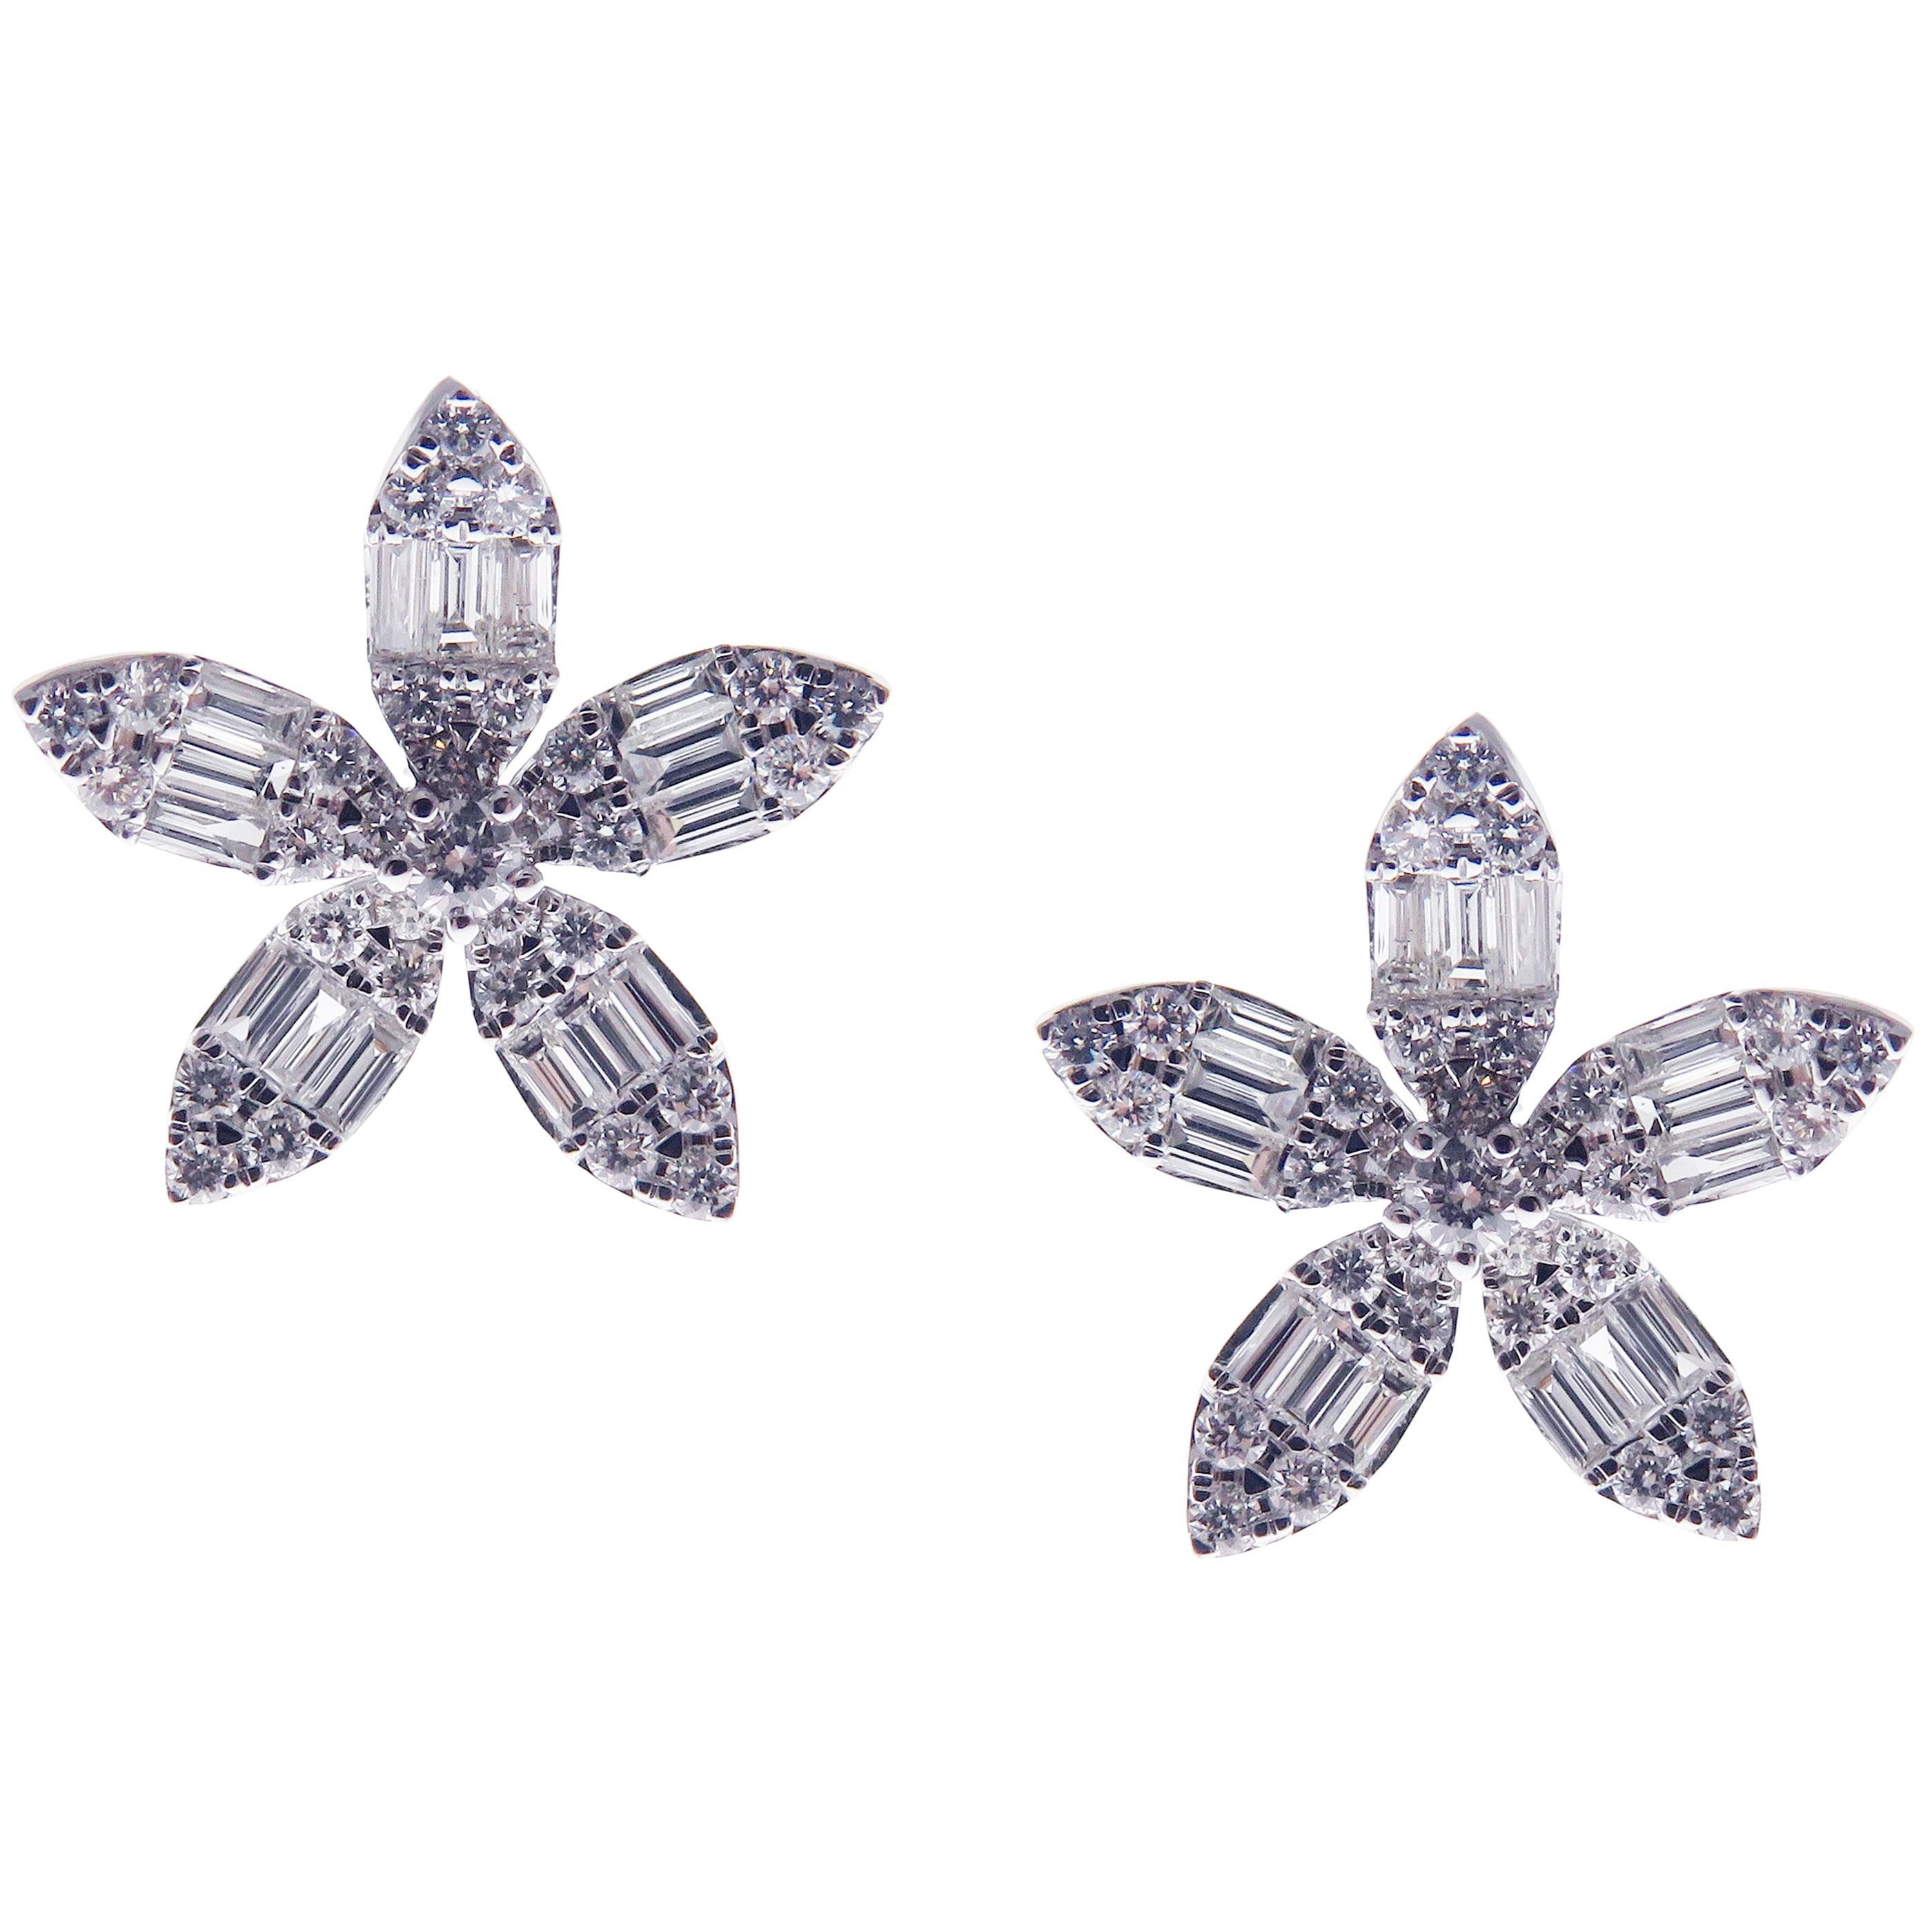 These classic flower stud earrings with round and baguette white diamonds are crafted in 18-karat white gold, featuring 62 round white diamonds totaling of 0.45 carats and 30 baguette white diamonds totaling of 0.50 carats.
These earrings come with